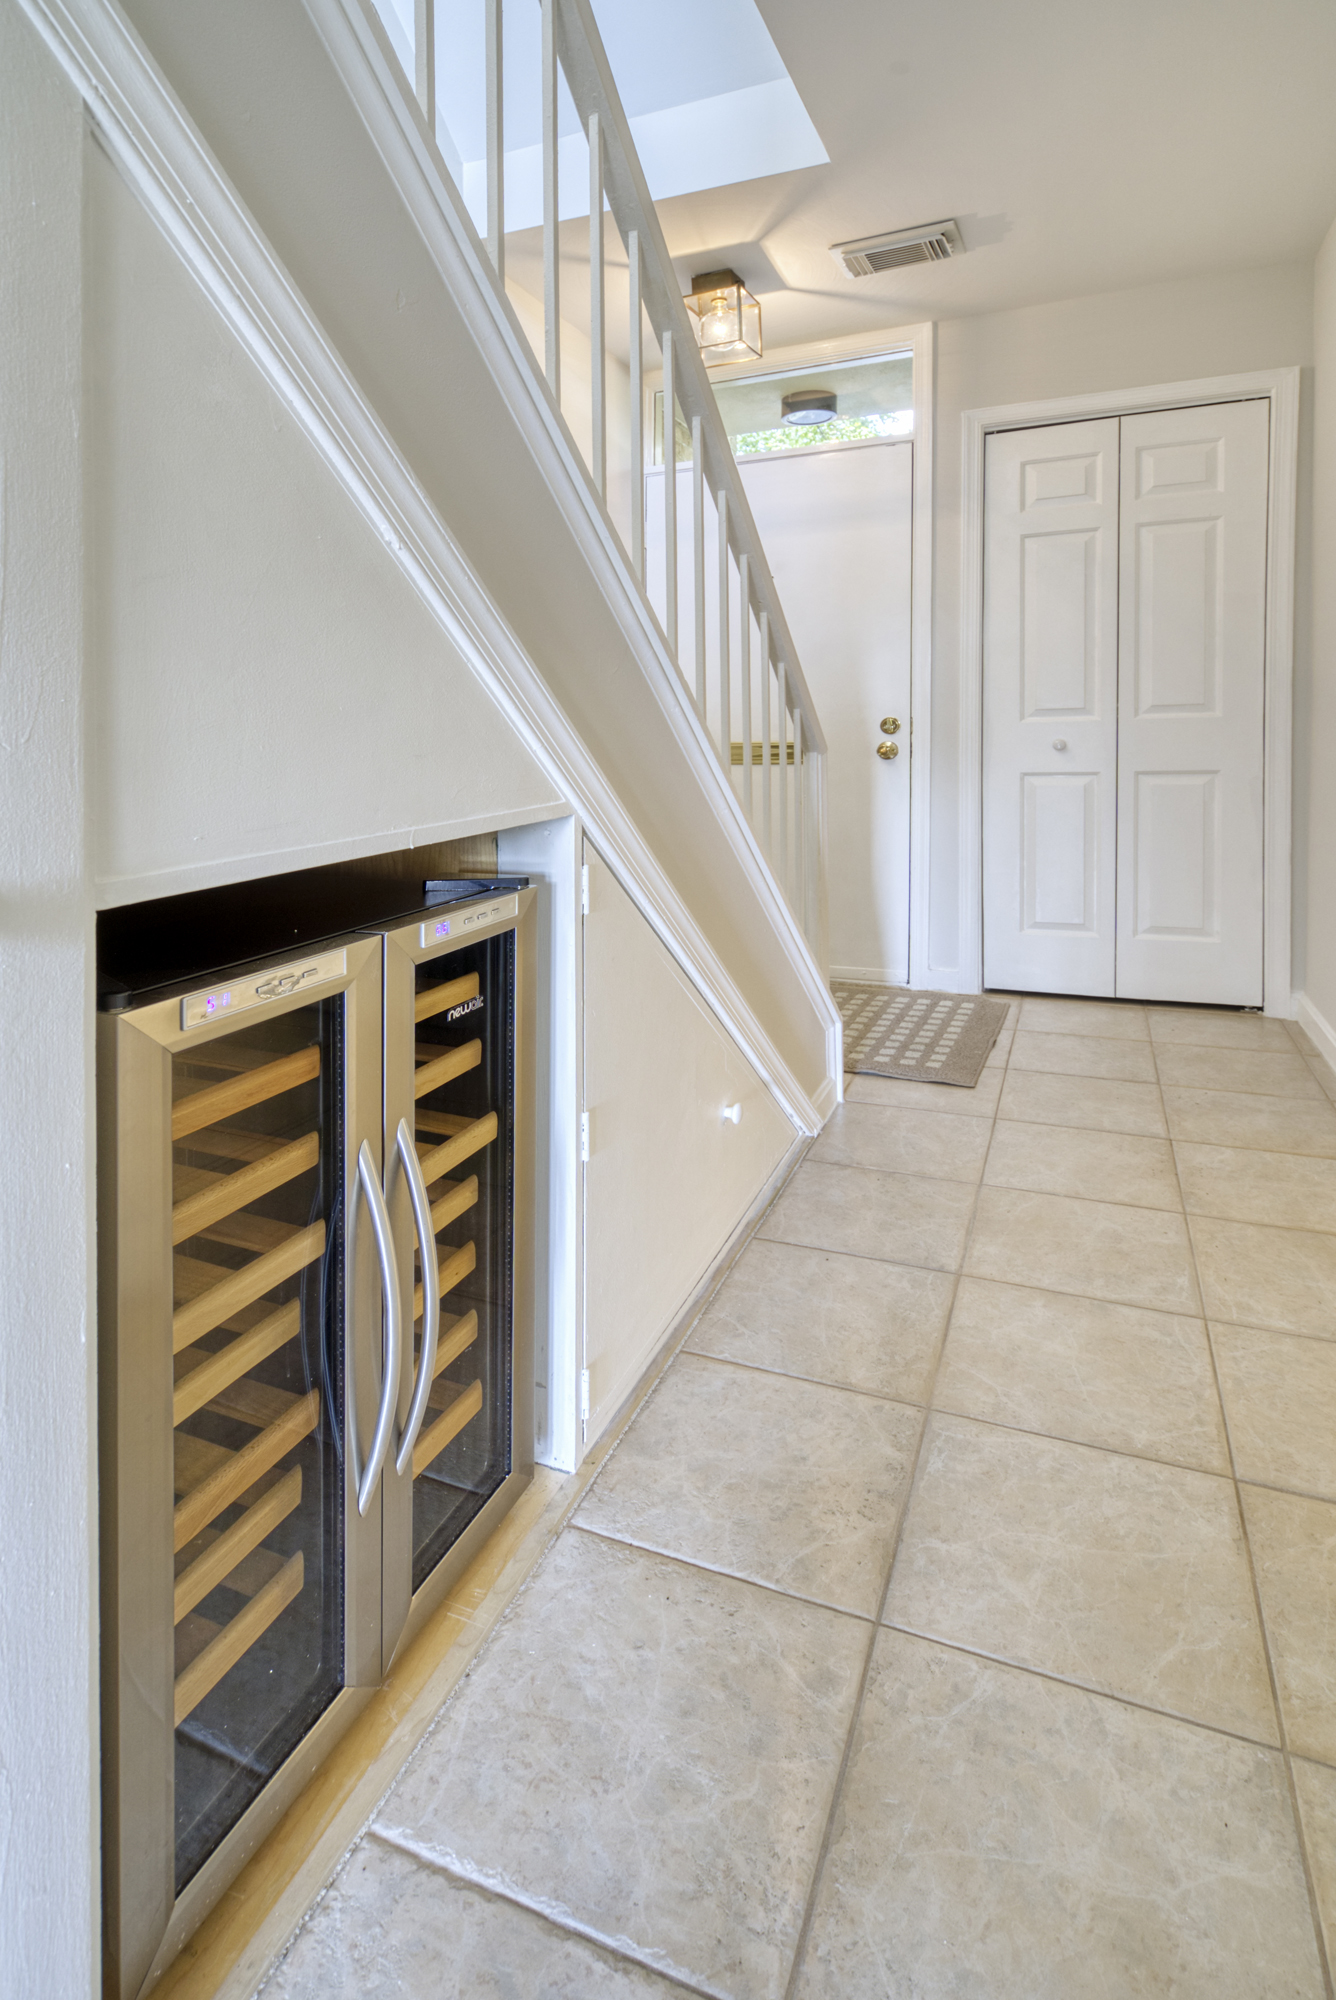 Professional interior photo of 1215 N Nash St #1, Arlington - showing the first floor hall to the staircase with a build in wine cooler under the stairs